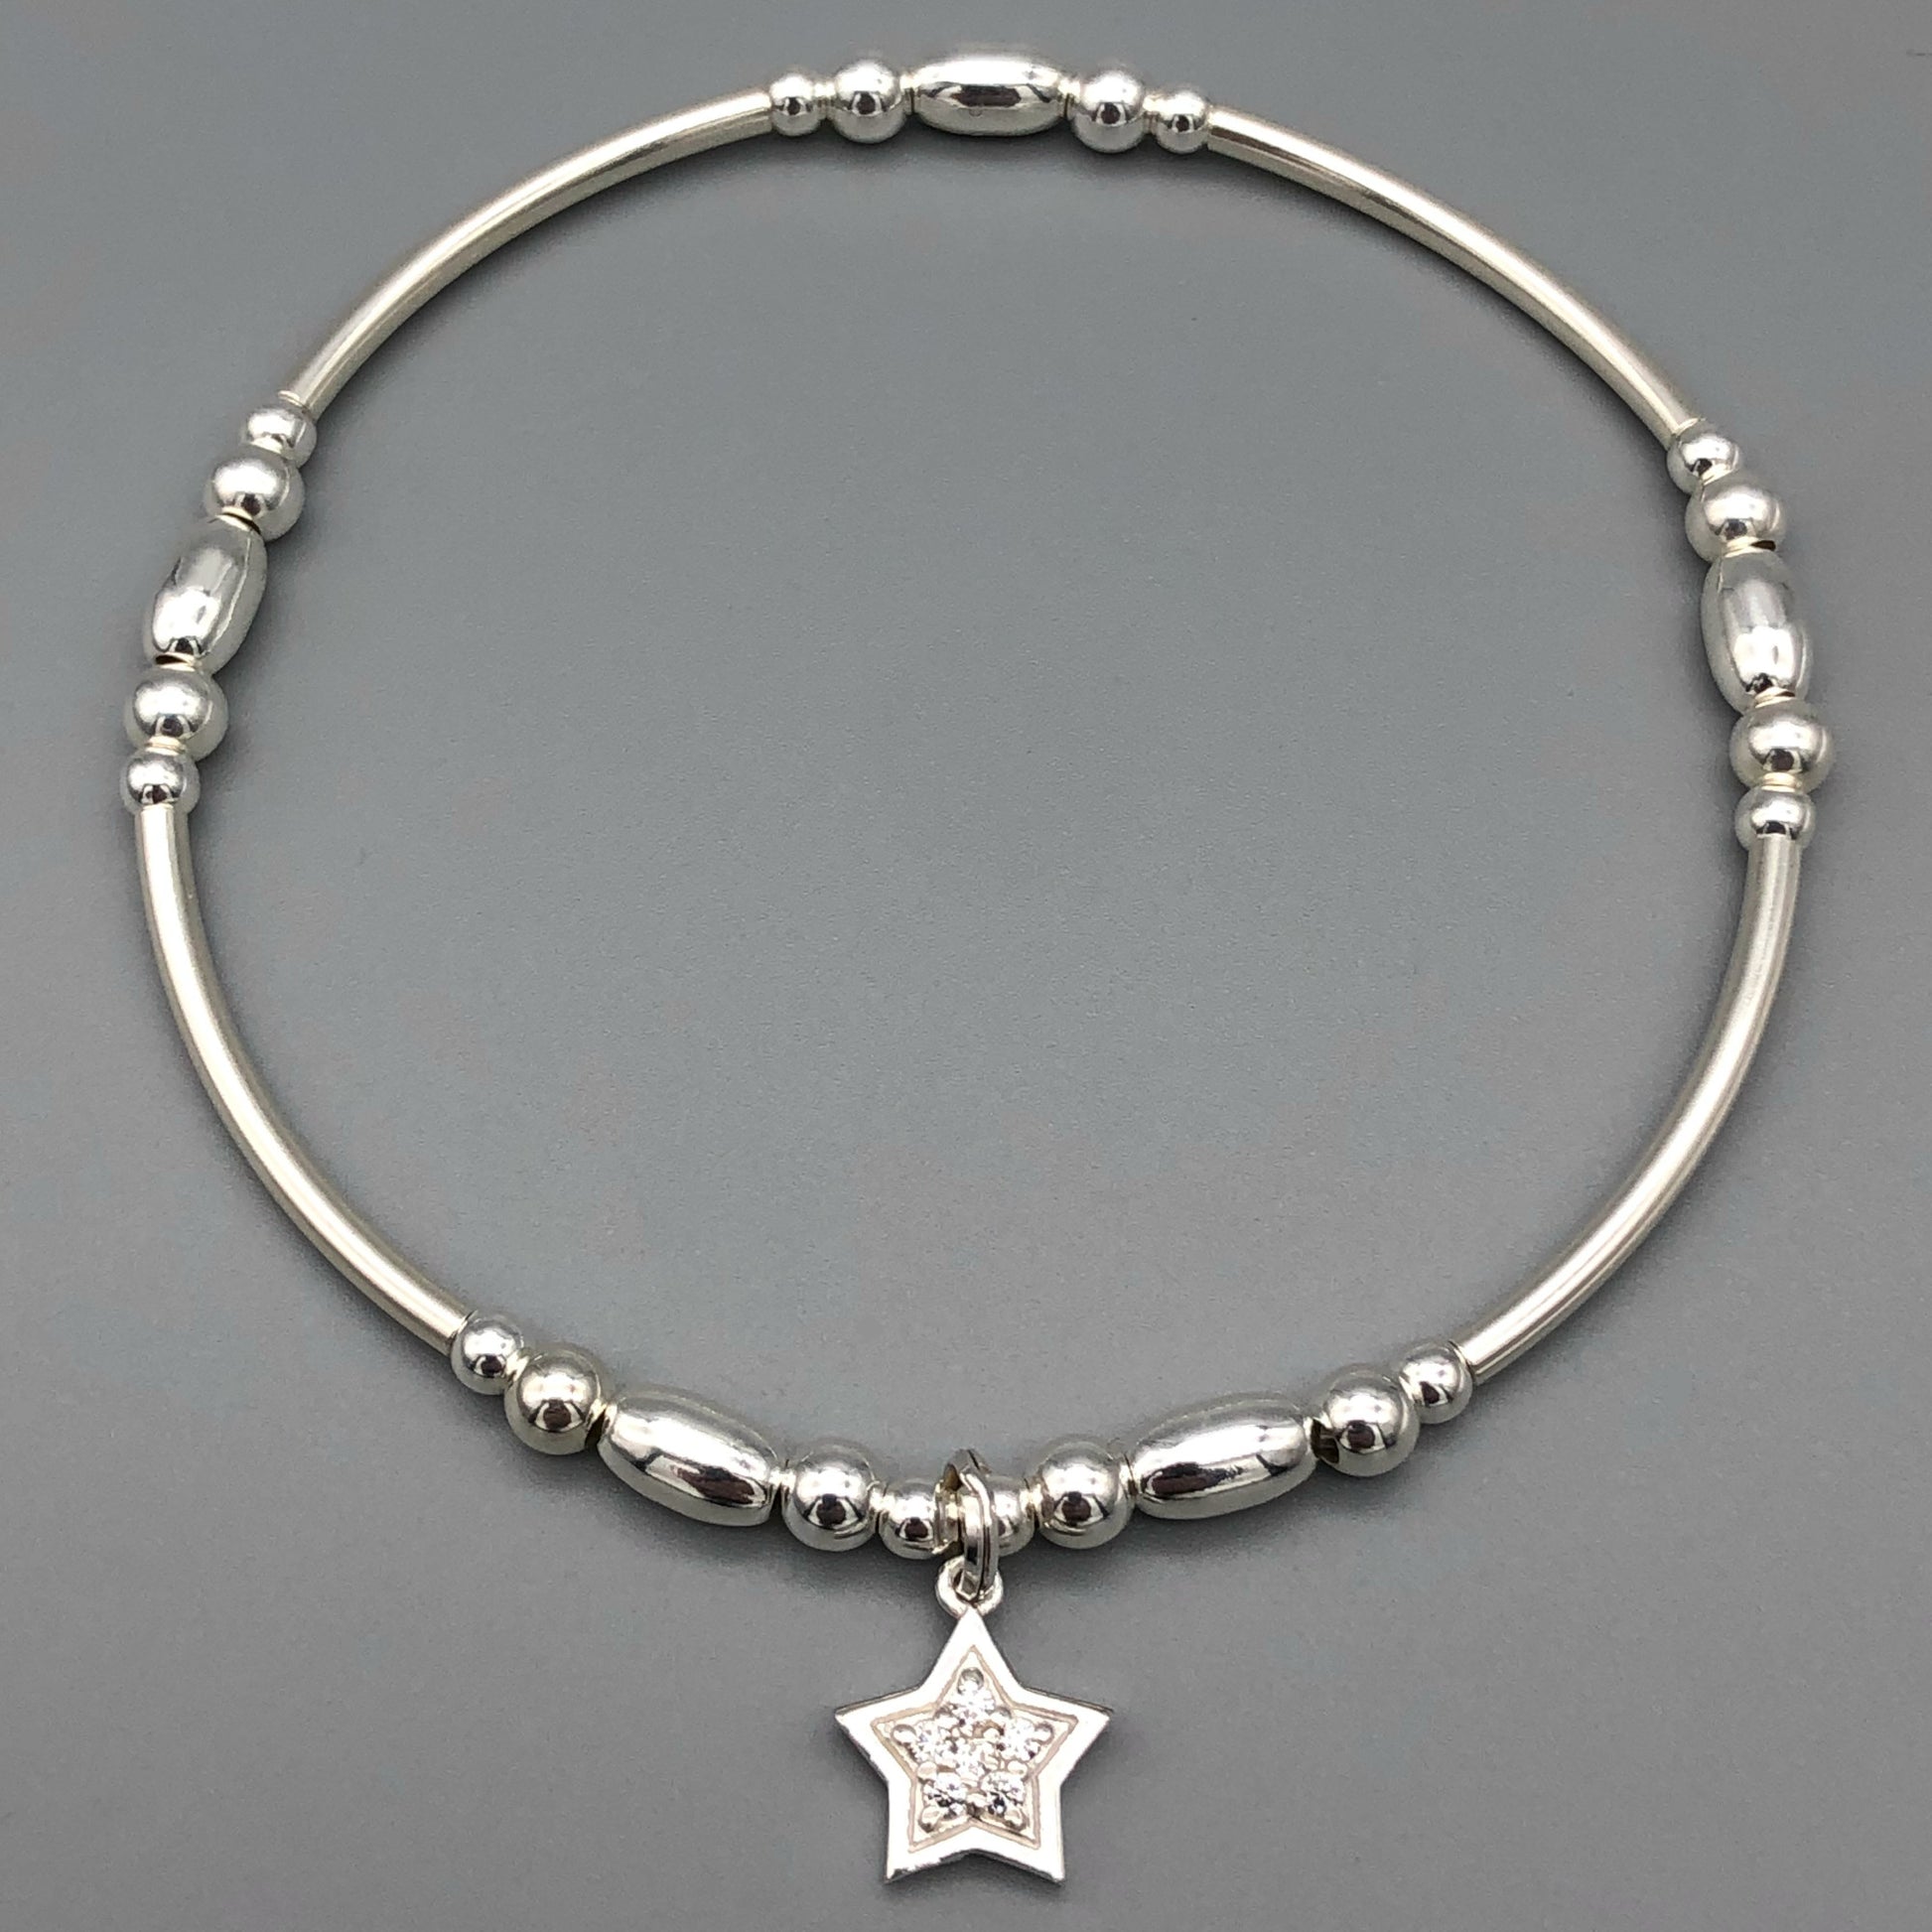 Star Charm Sterling Silver Women's Stacking Bracelet by My Silver Wish